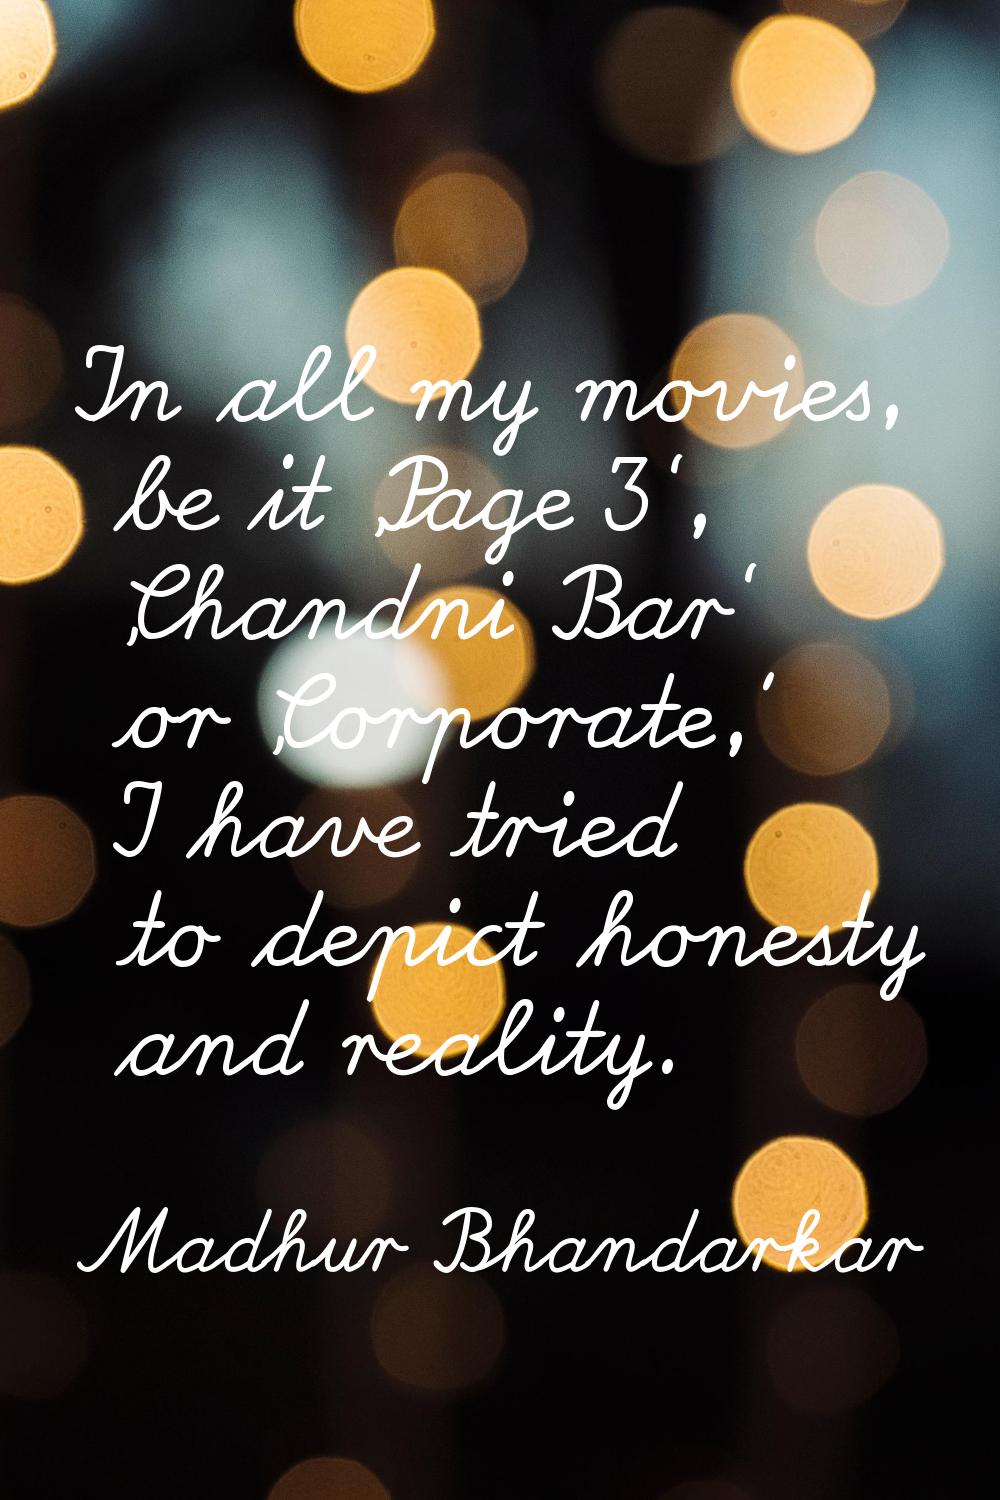 In all my movies, be it 'Page 3', 'Chandni Bar' or 'Corporate,' I have tried to depict honesty and 